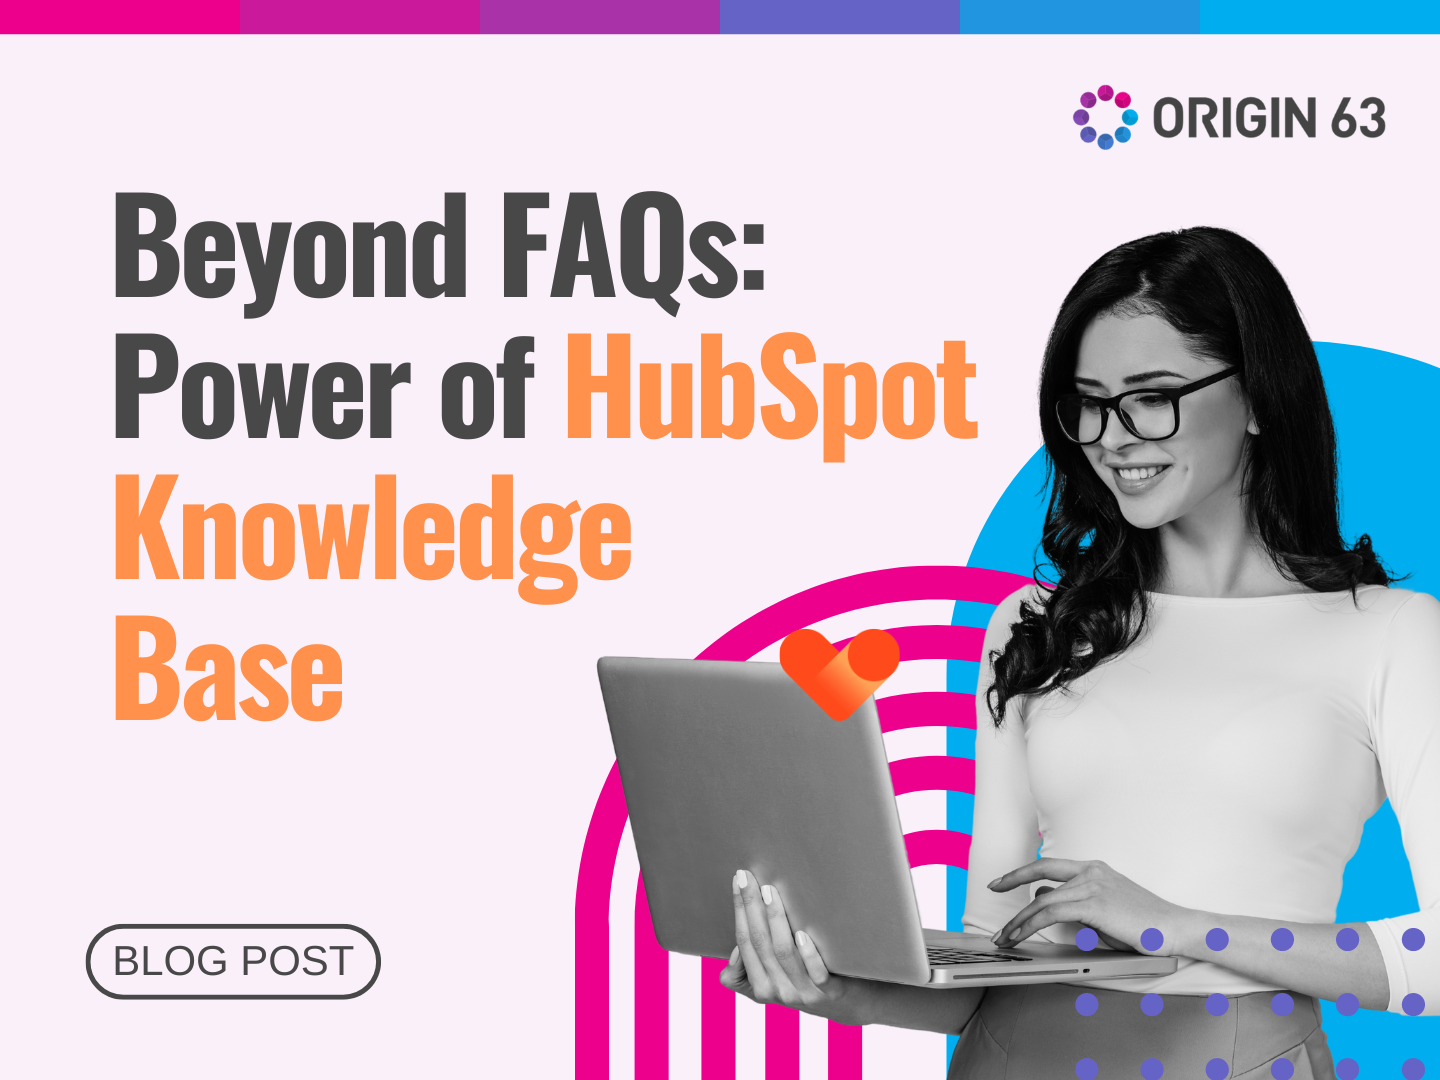 Transform your customer service with HubSpot Knowledge Base. Learn to build, manage, and maximize this powerful tool.